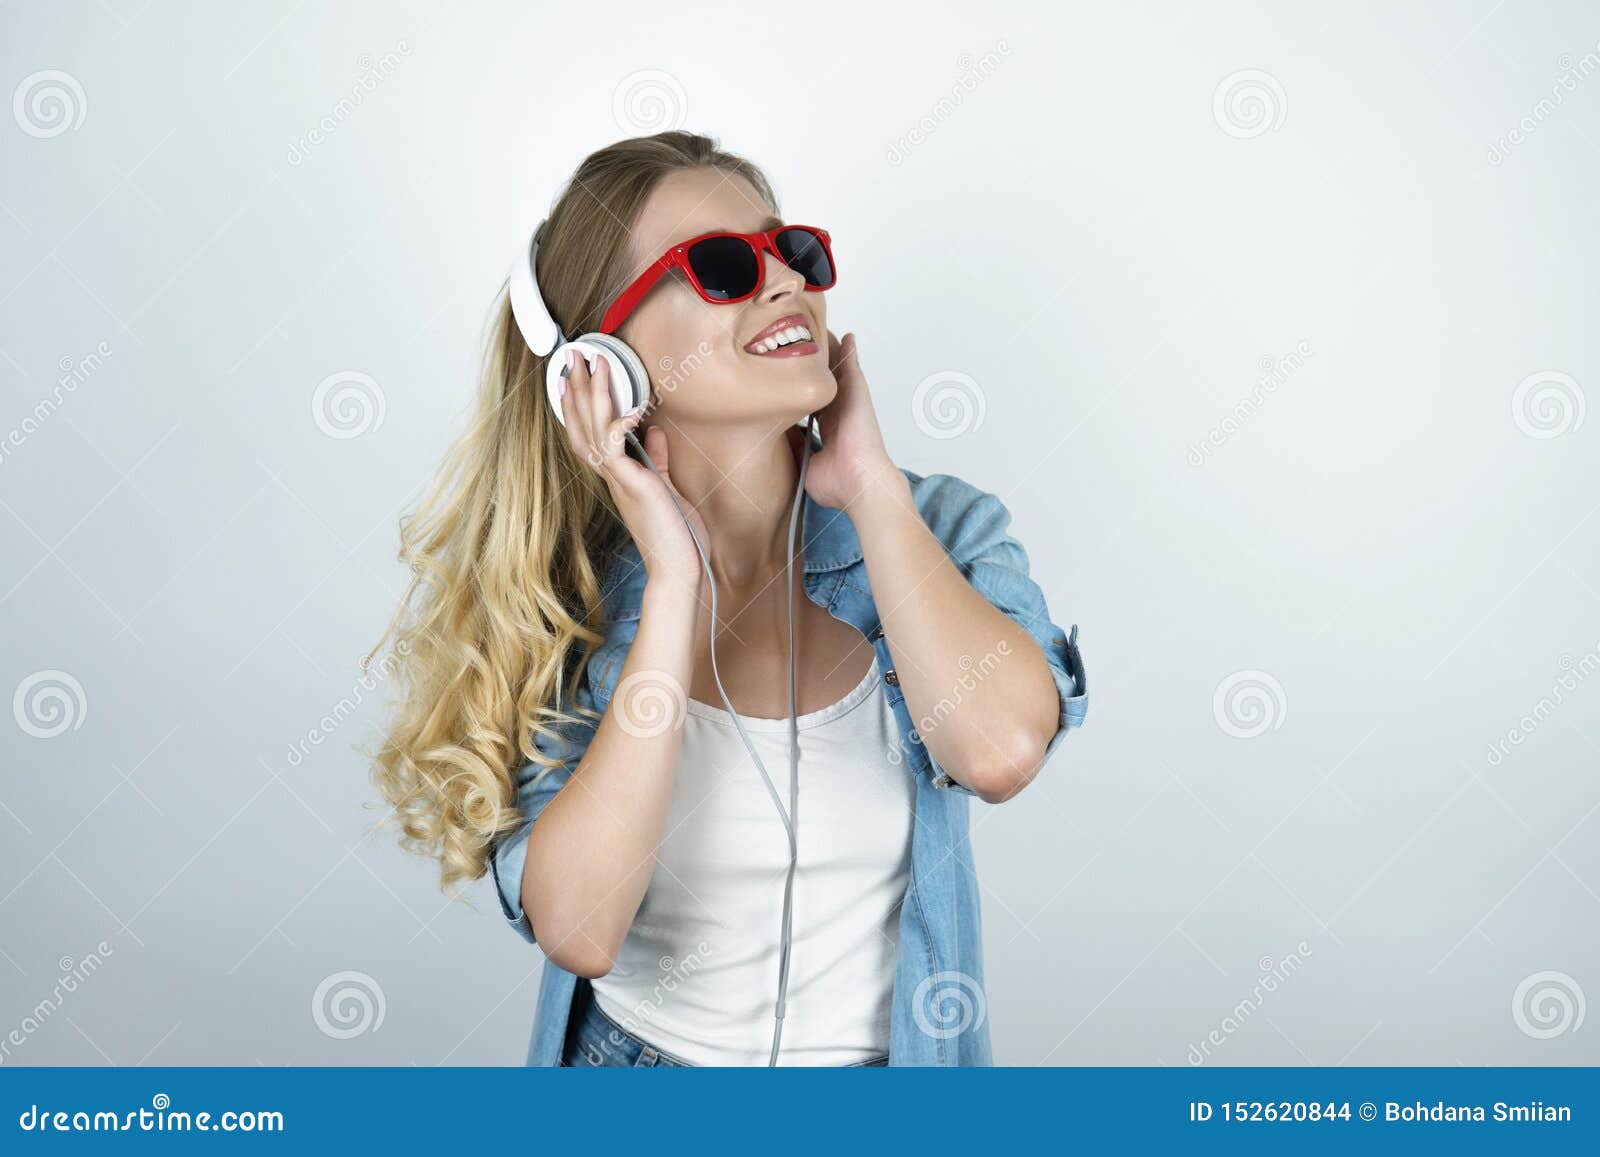 Blond Woman In Headphones And Sunglasses Listening To Music Smiling White Isolated Background